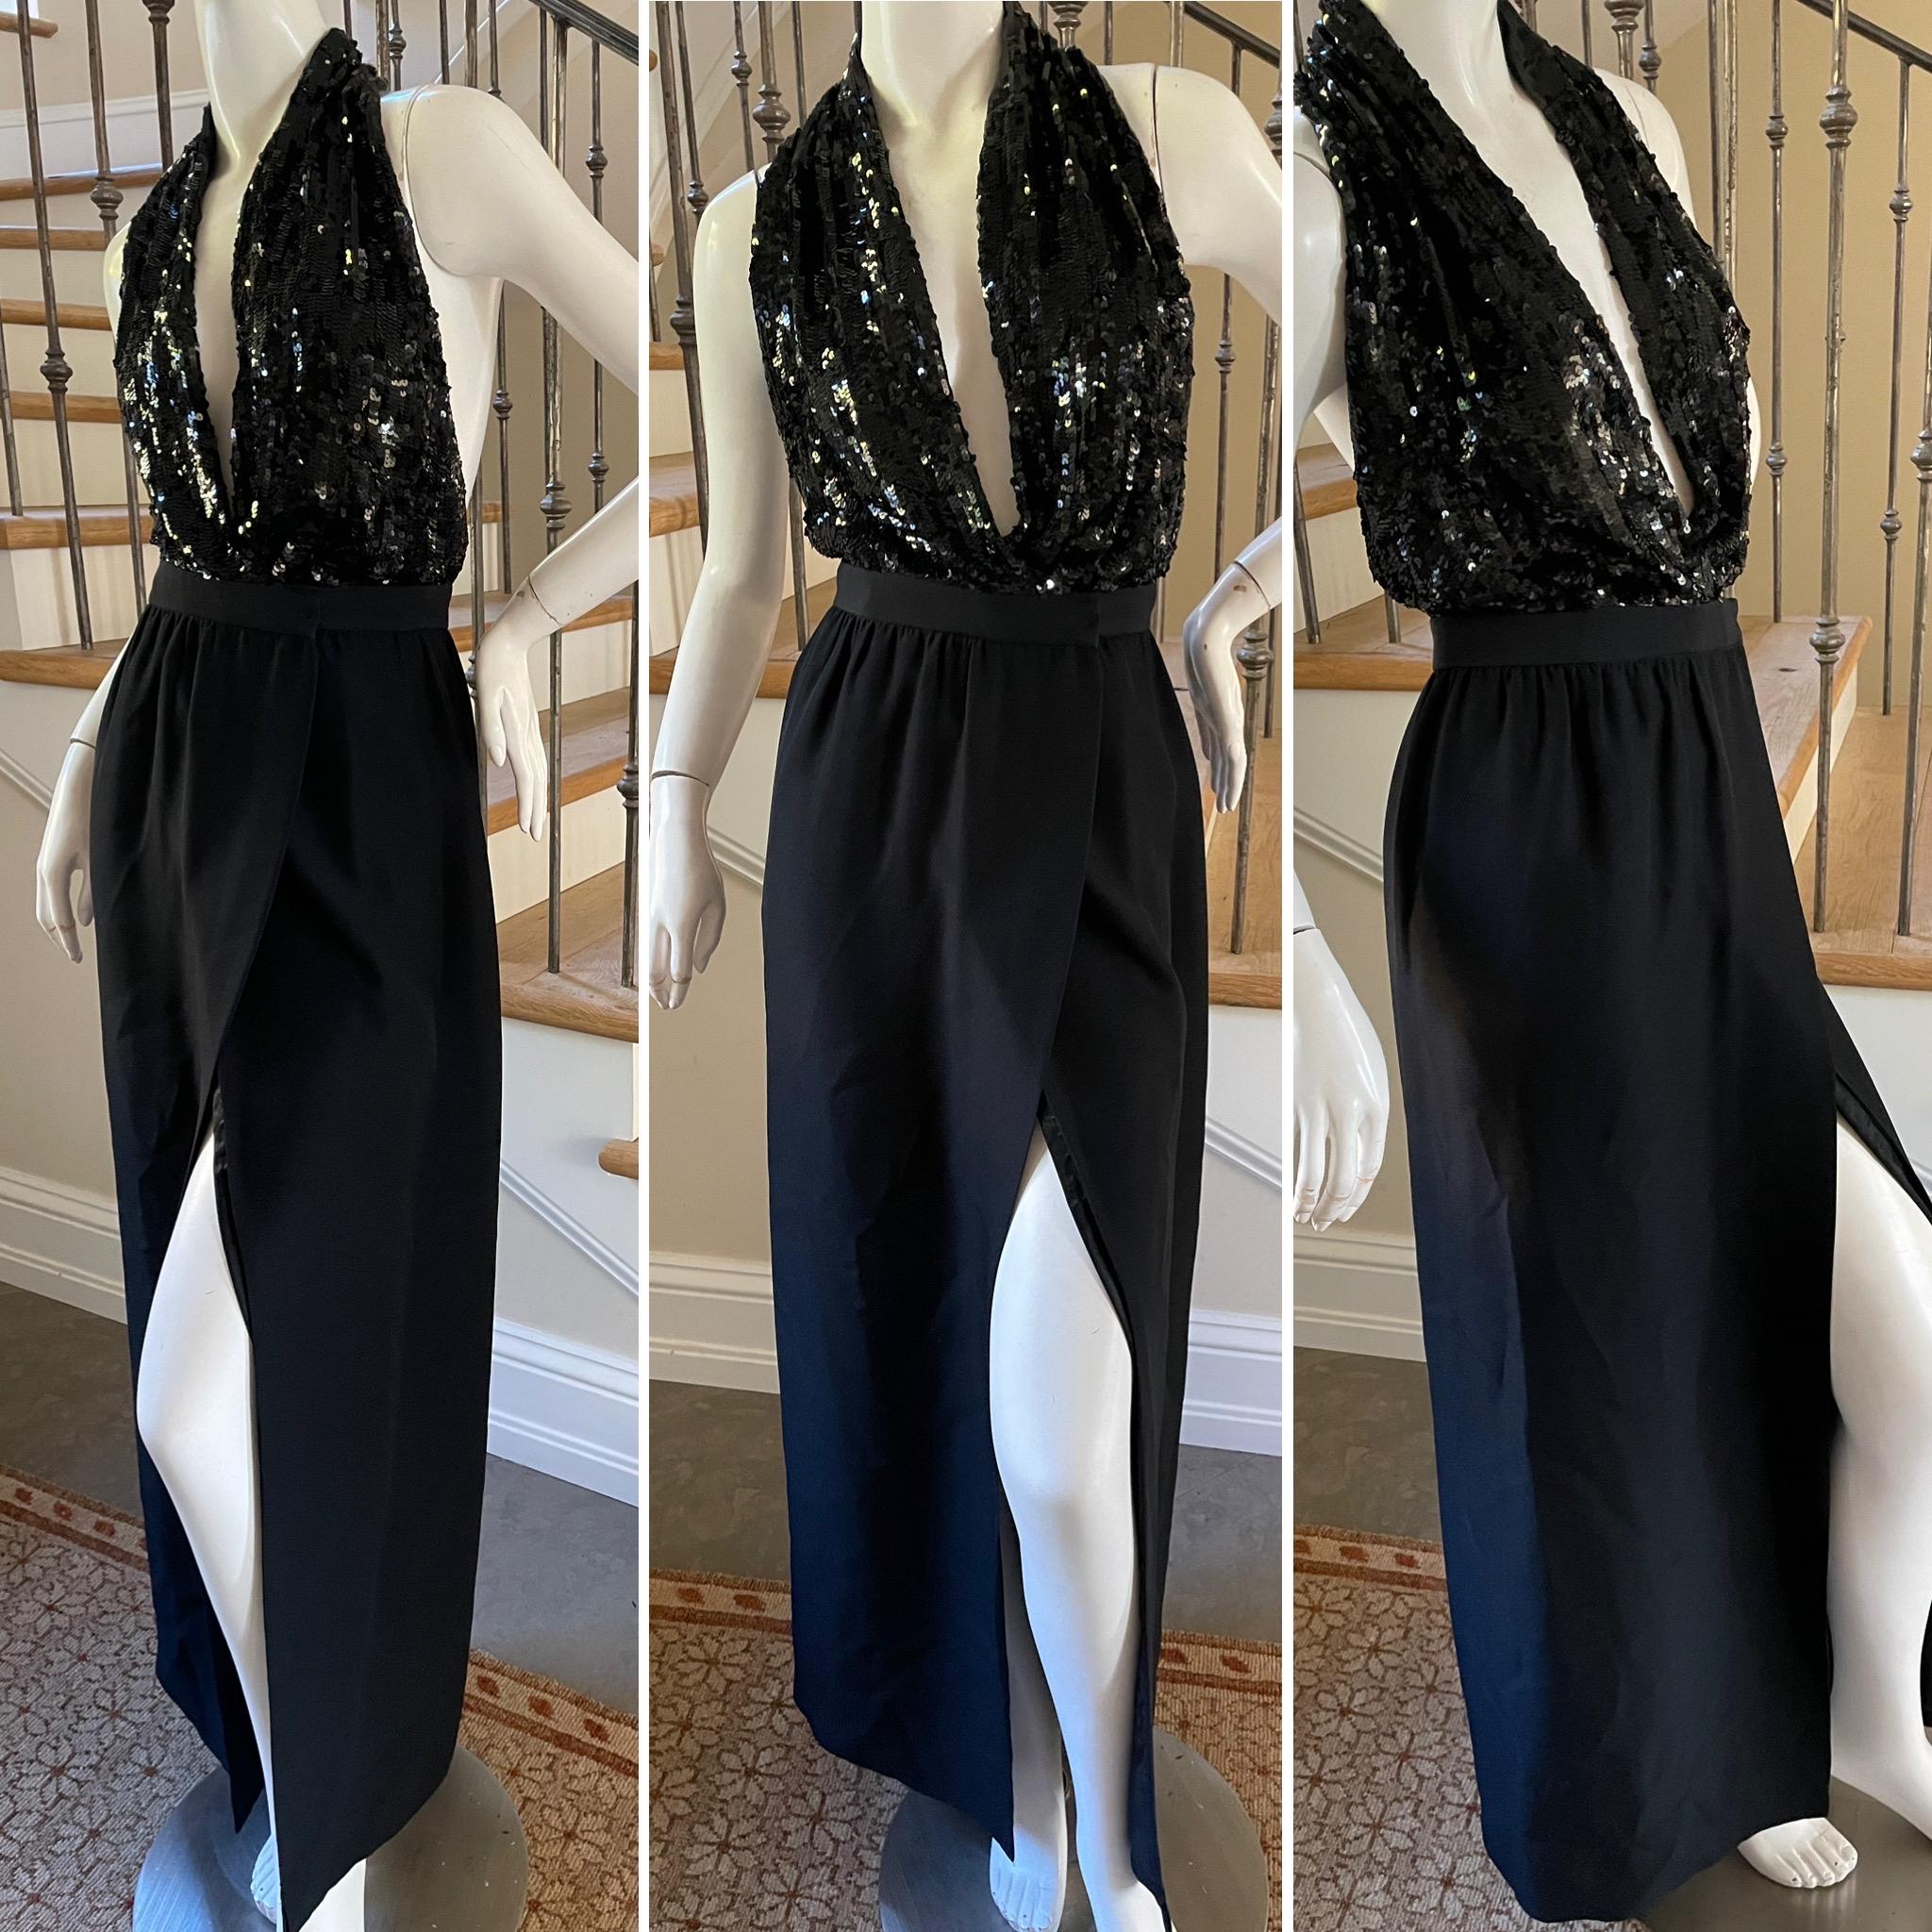 Michael Kors Vintage 90's Black Sequin Plunging Wrap Style Halter Dress.
American Fashion at it's best.
Size 6
  This is so pretty, looks better on live model.
 Bust 36